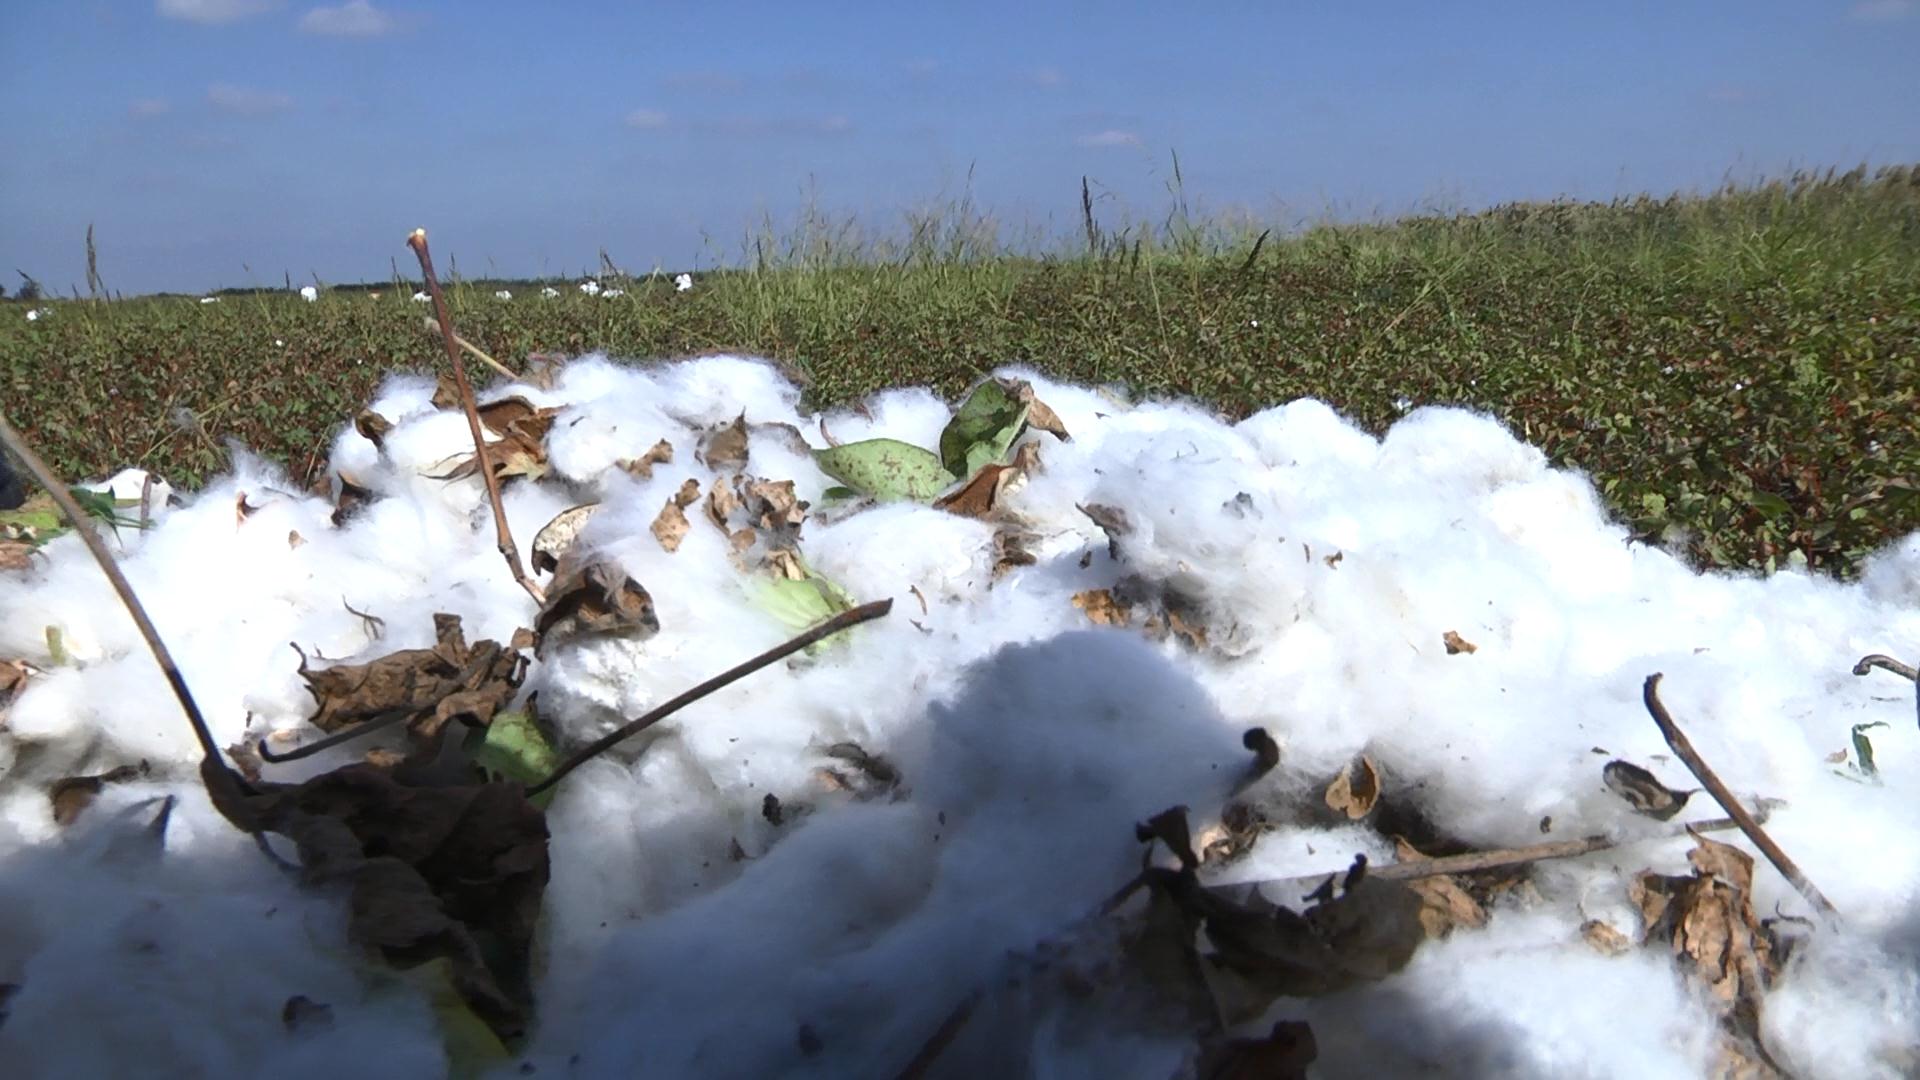 "In America, one farmer can manage 12 hectares of land, and in Azerbaijan, 24 people work on 10 hectares" - on the profitability of the cotton harvest in Azerbaijan